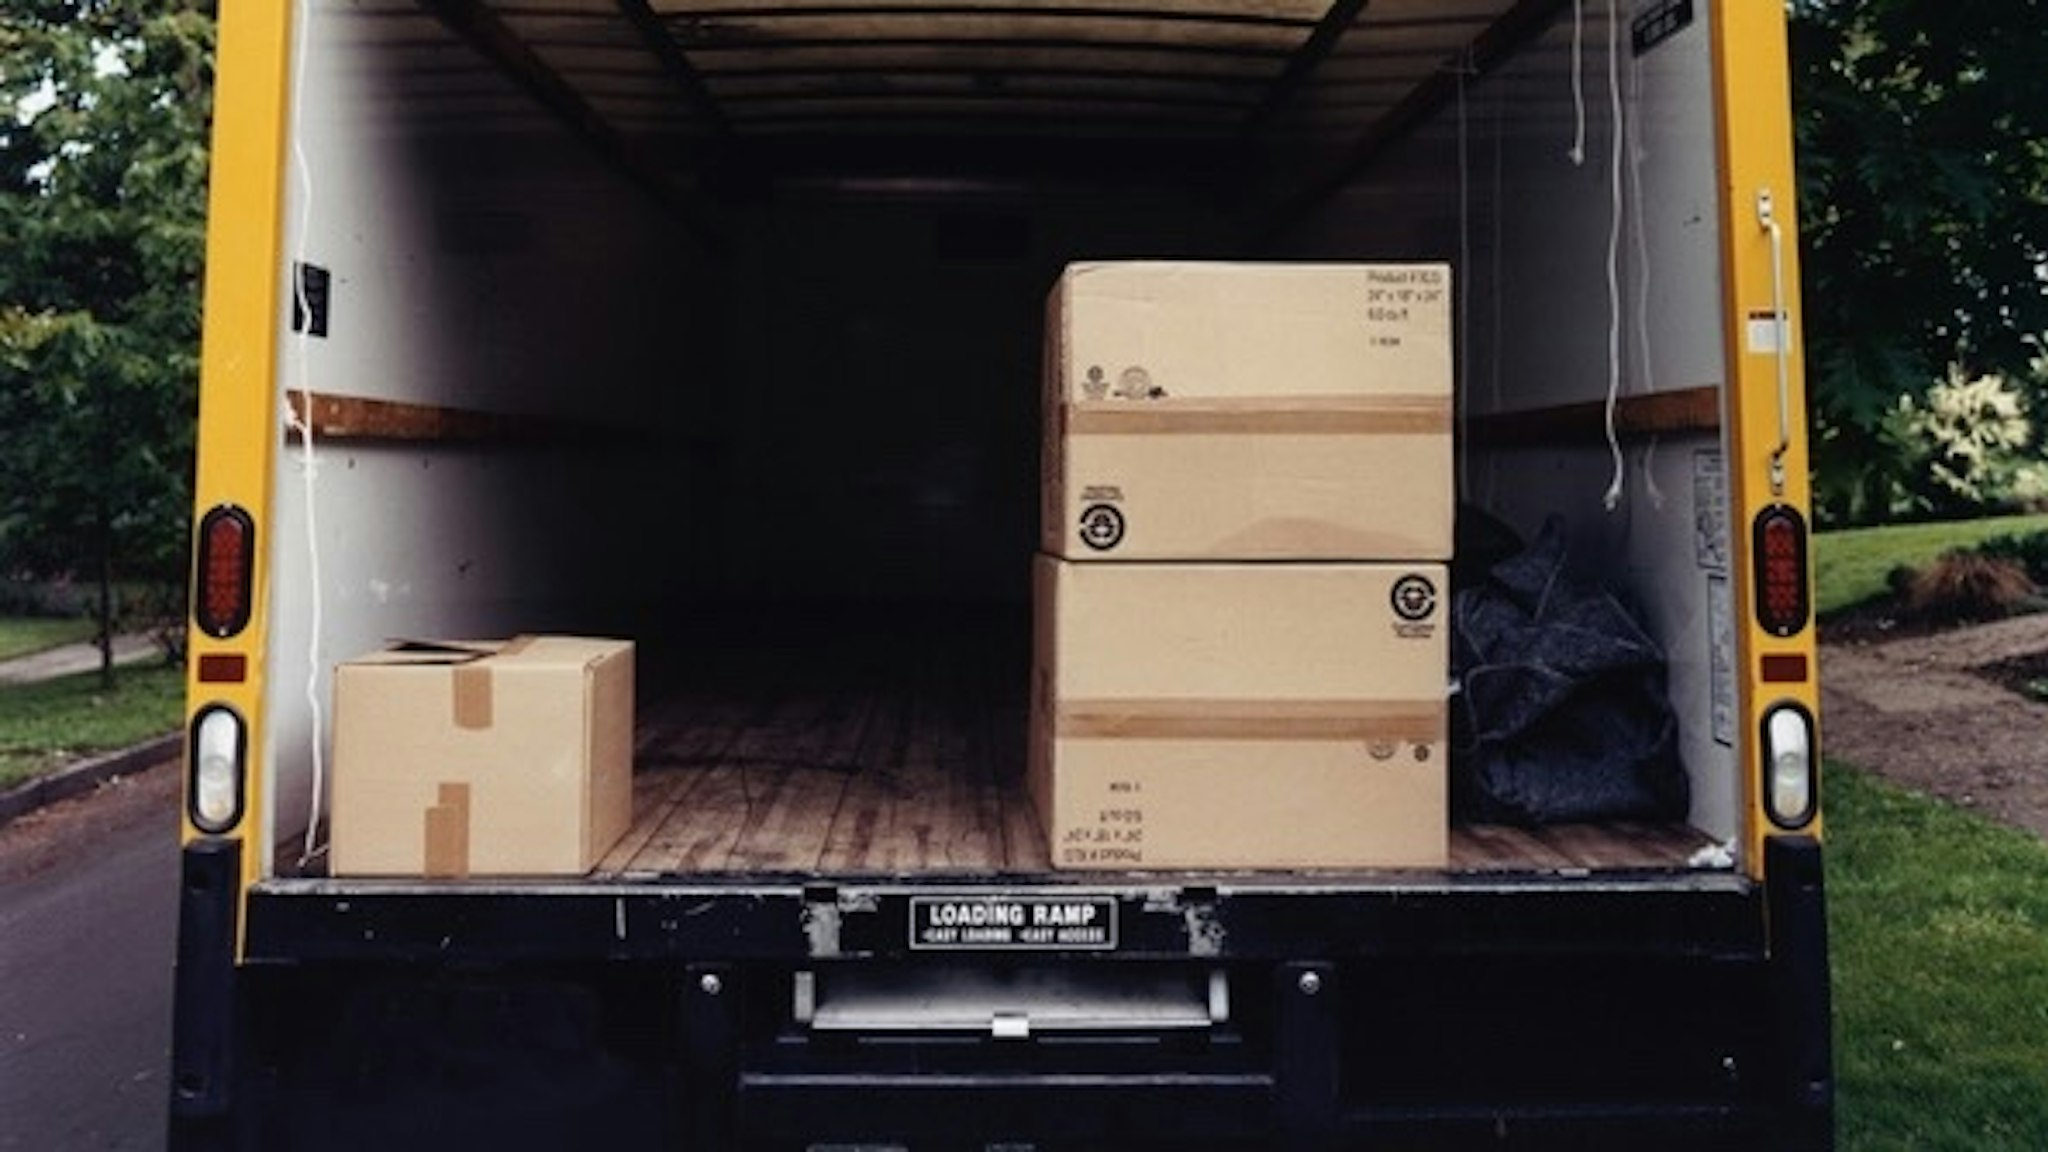 Boxes in Back of Moving Van - stock photo Charles Gullung via Getty Images